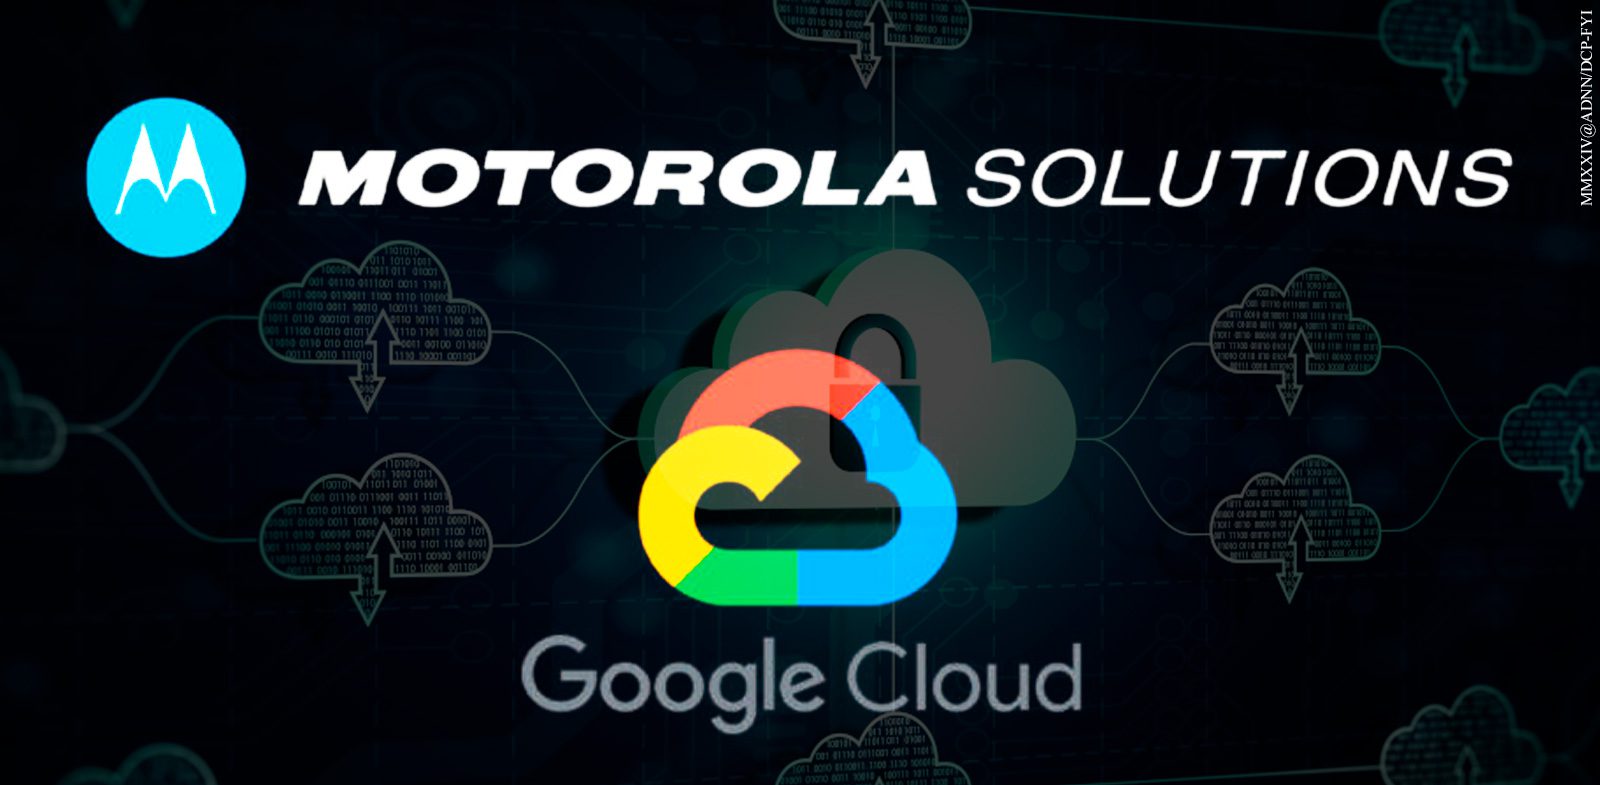 Google Cloud and Motorola Solutions team up to optimize public and enterprise security